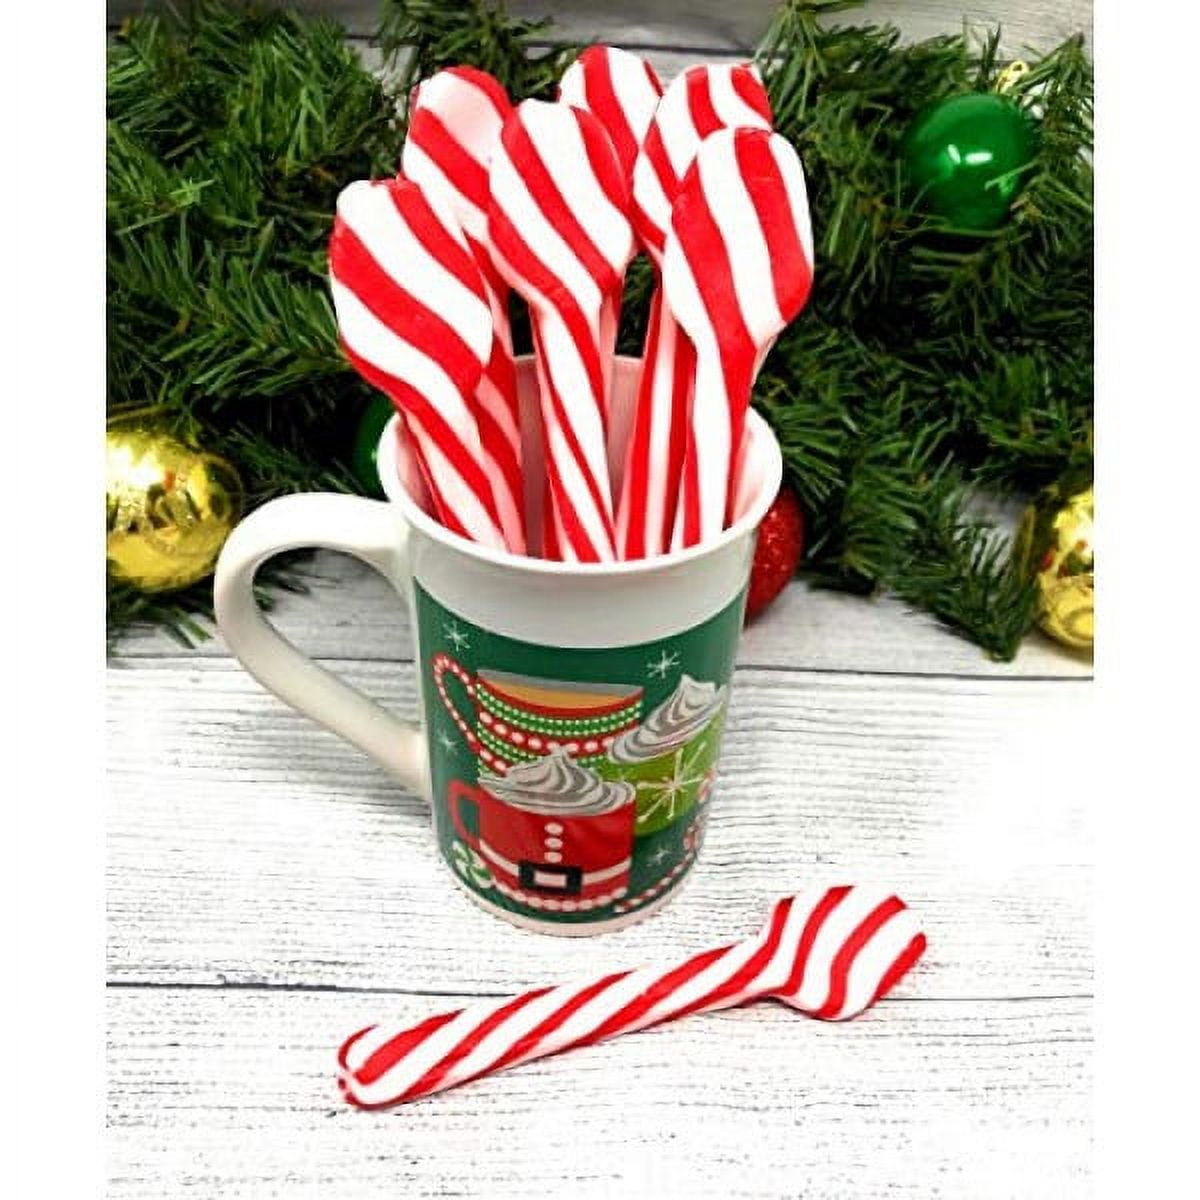 CGT Mini Peppermint Edible Candy Cups Sipper Shot Glass Holidays Christmas  Stocking Stuffers Gift Basket Party Favor Coffee Baking Treats Snacks